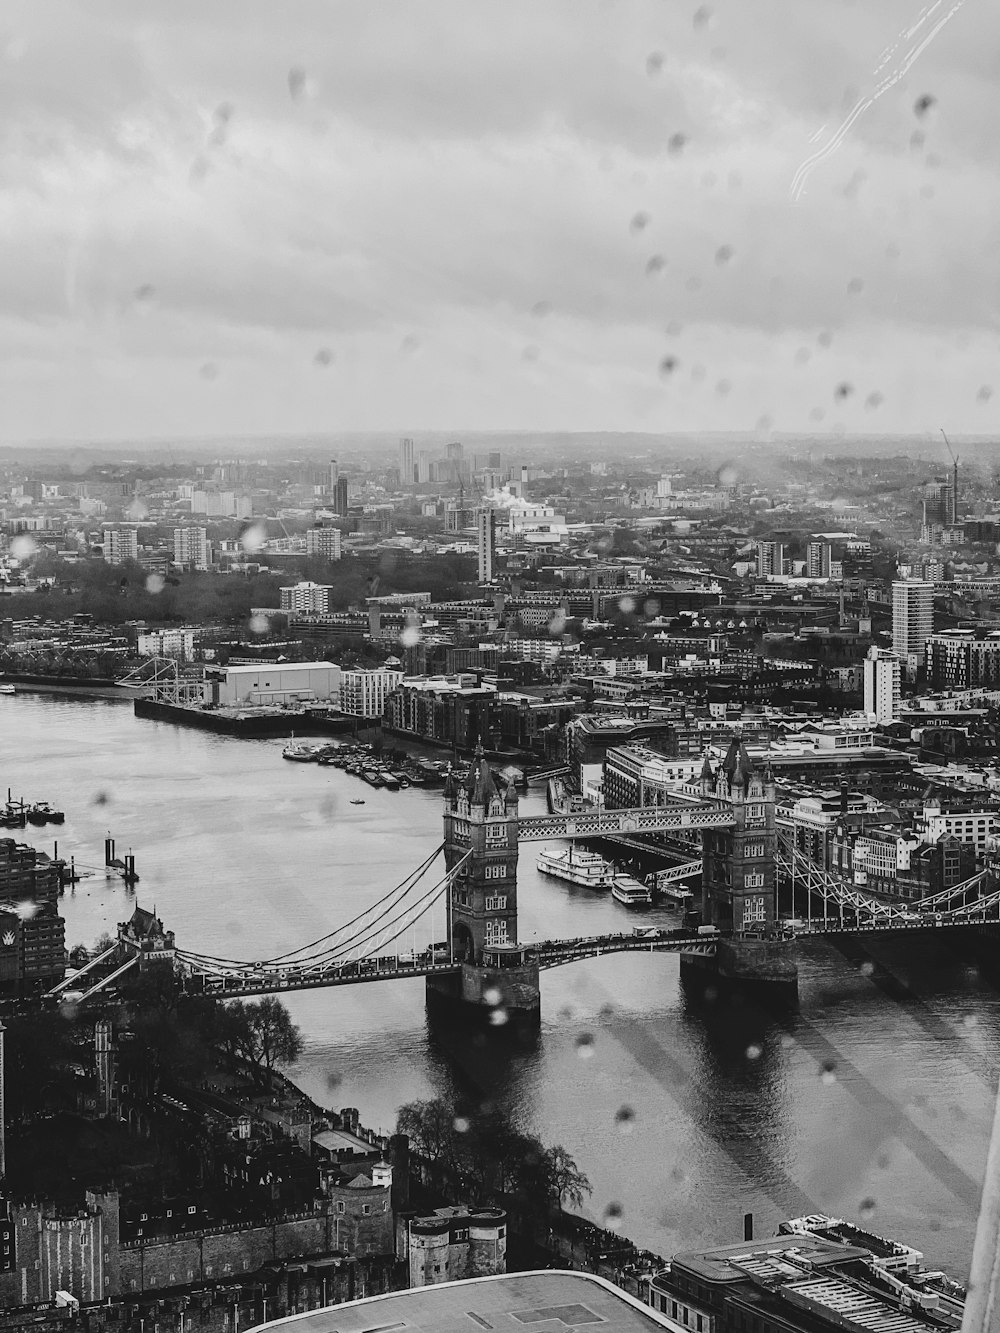 a black and white photo of a city with a bridge